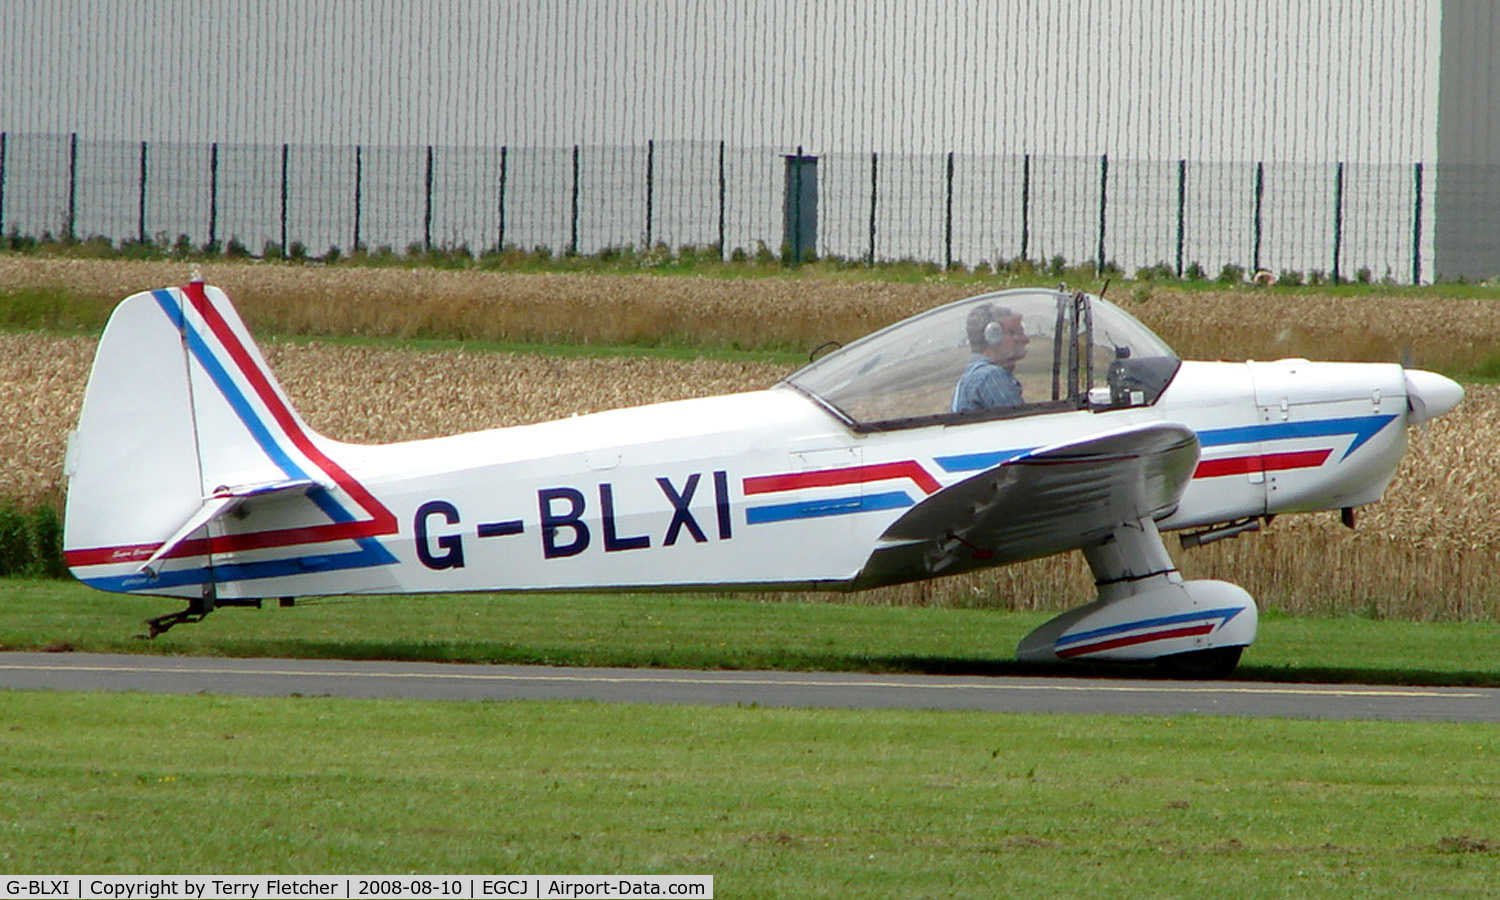 G-BLXI, 1965 Scintex CP-1310-C3 Super Emeraude C/N 937, Visitor to the 2008 LAA Regional Fly-in at Sherburn